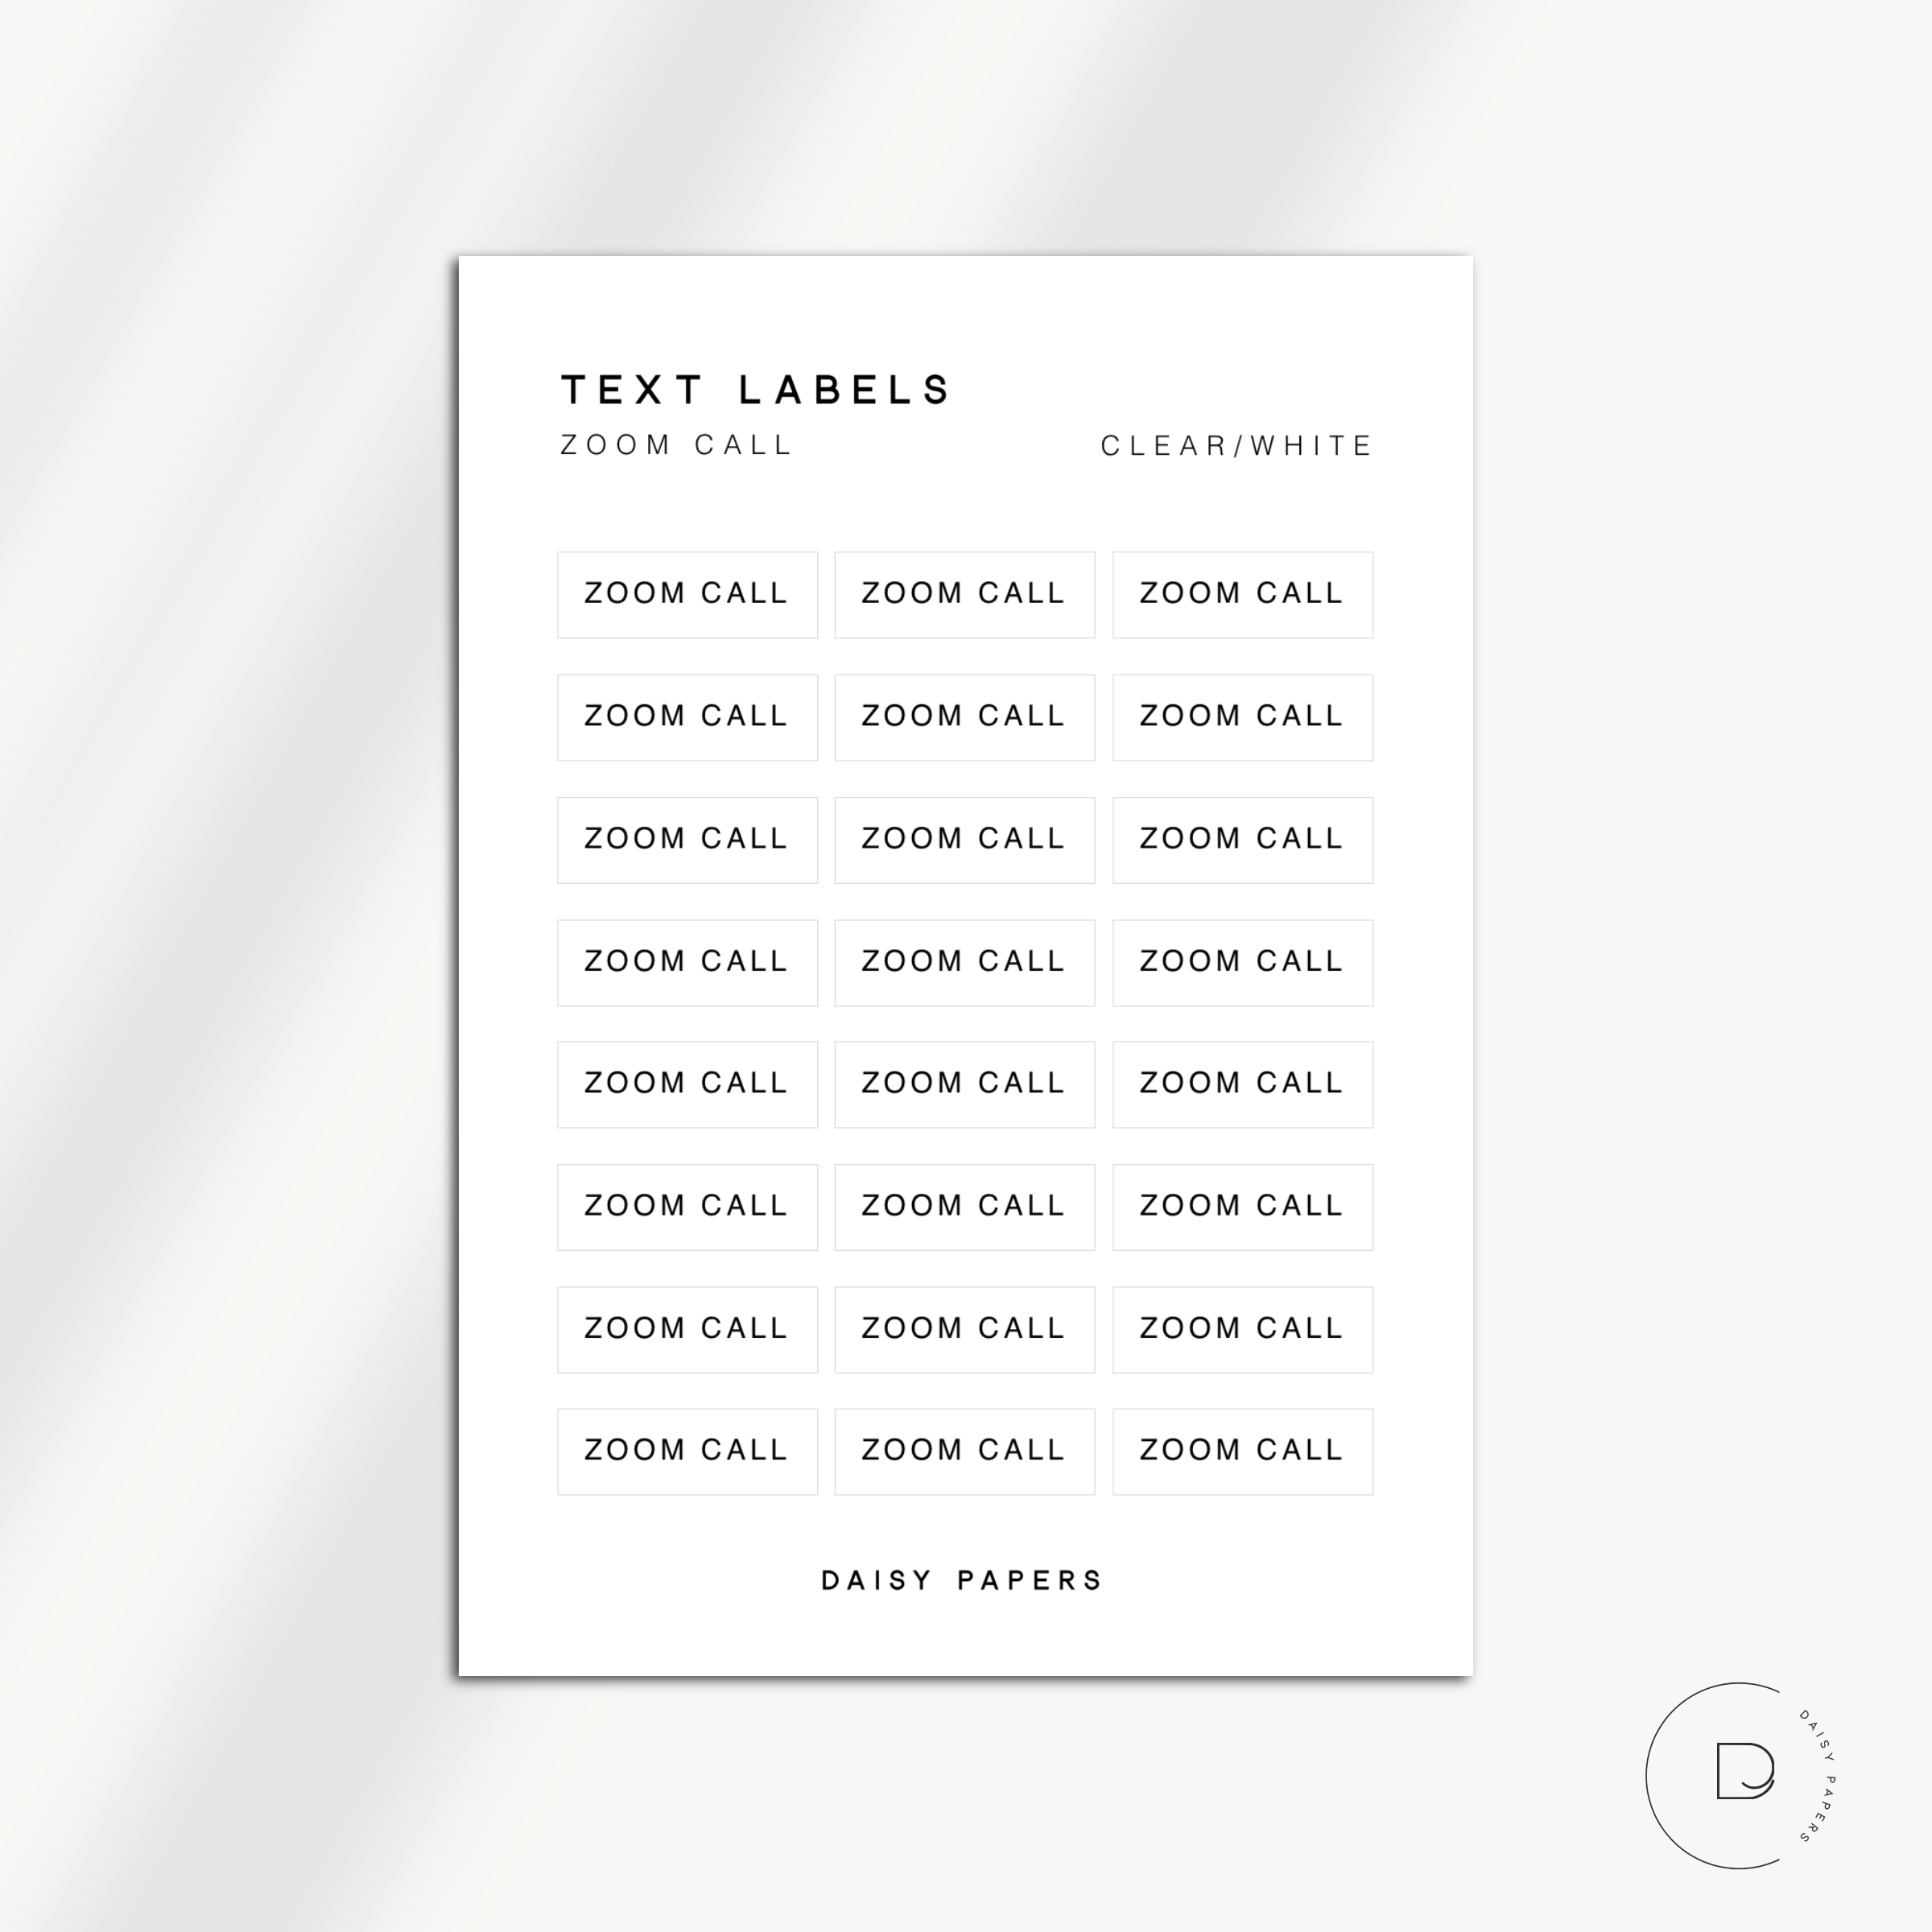 TEXT LABELS - ZOOM CALL